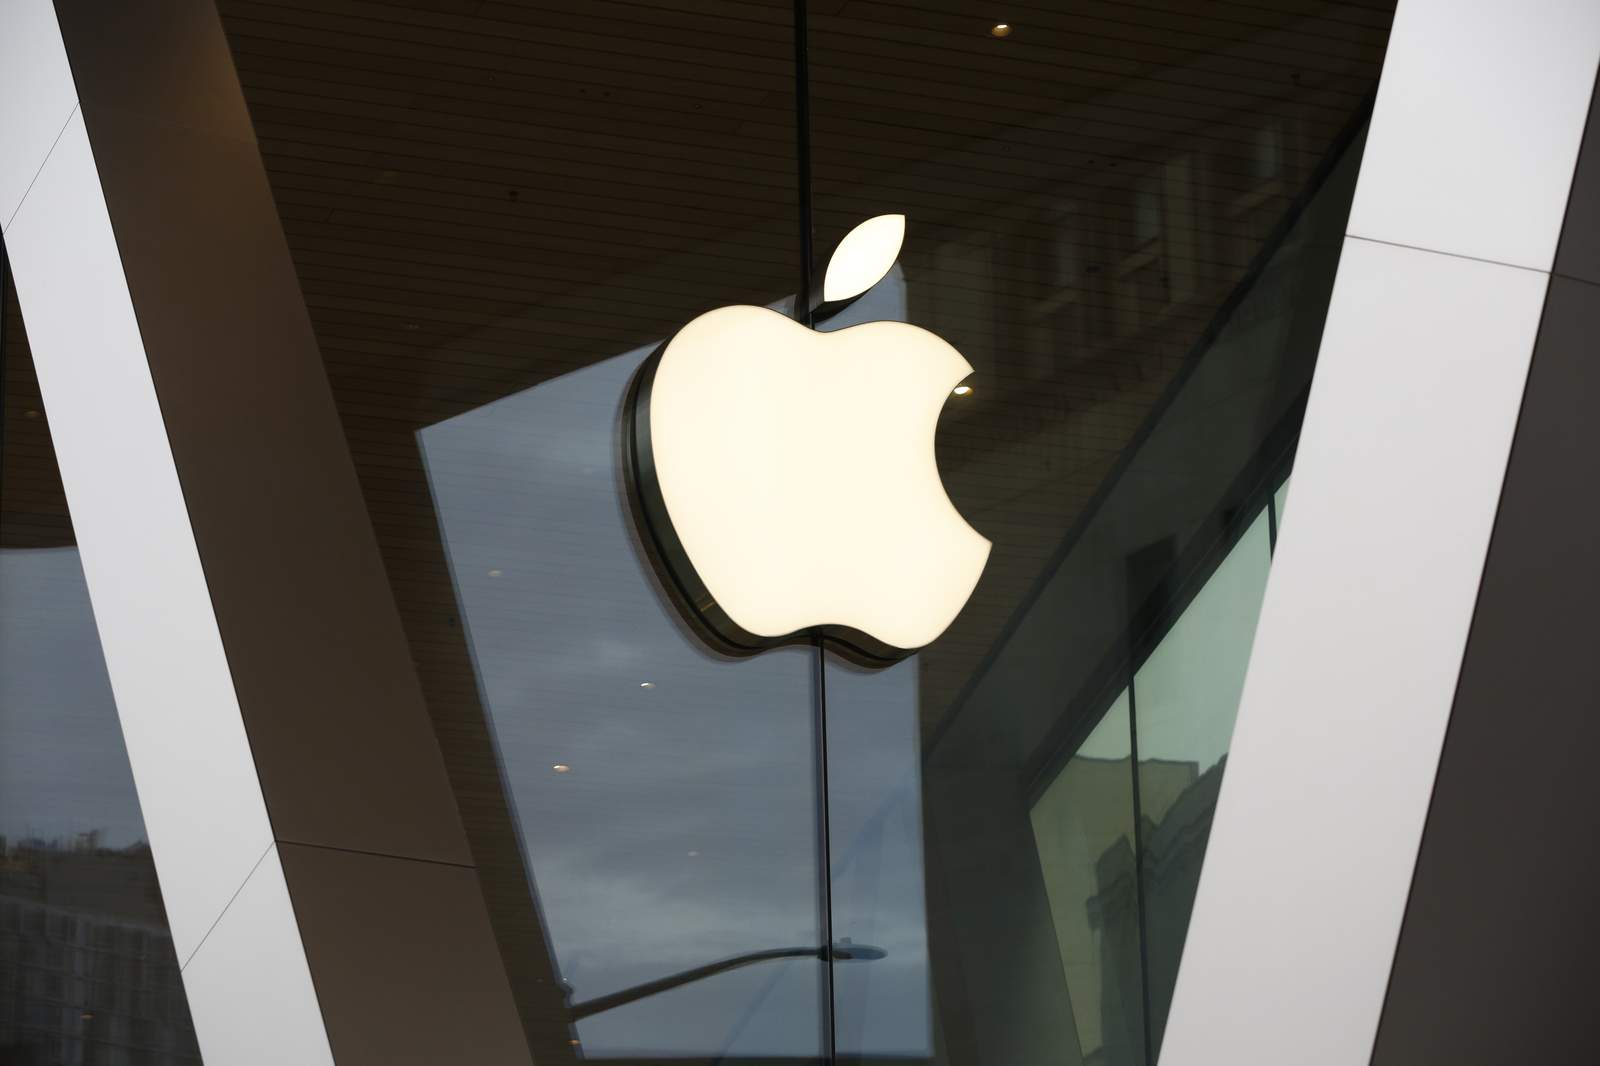 UK competition watchdog investigates Apple's App Store